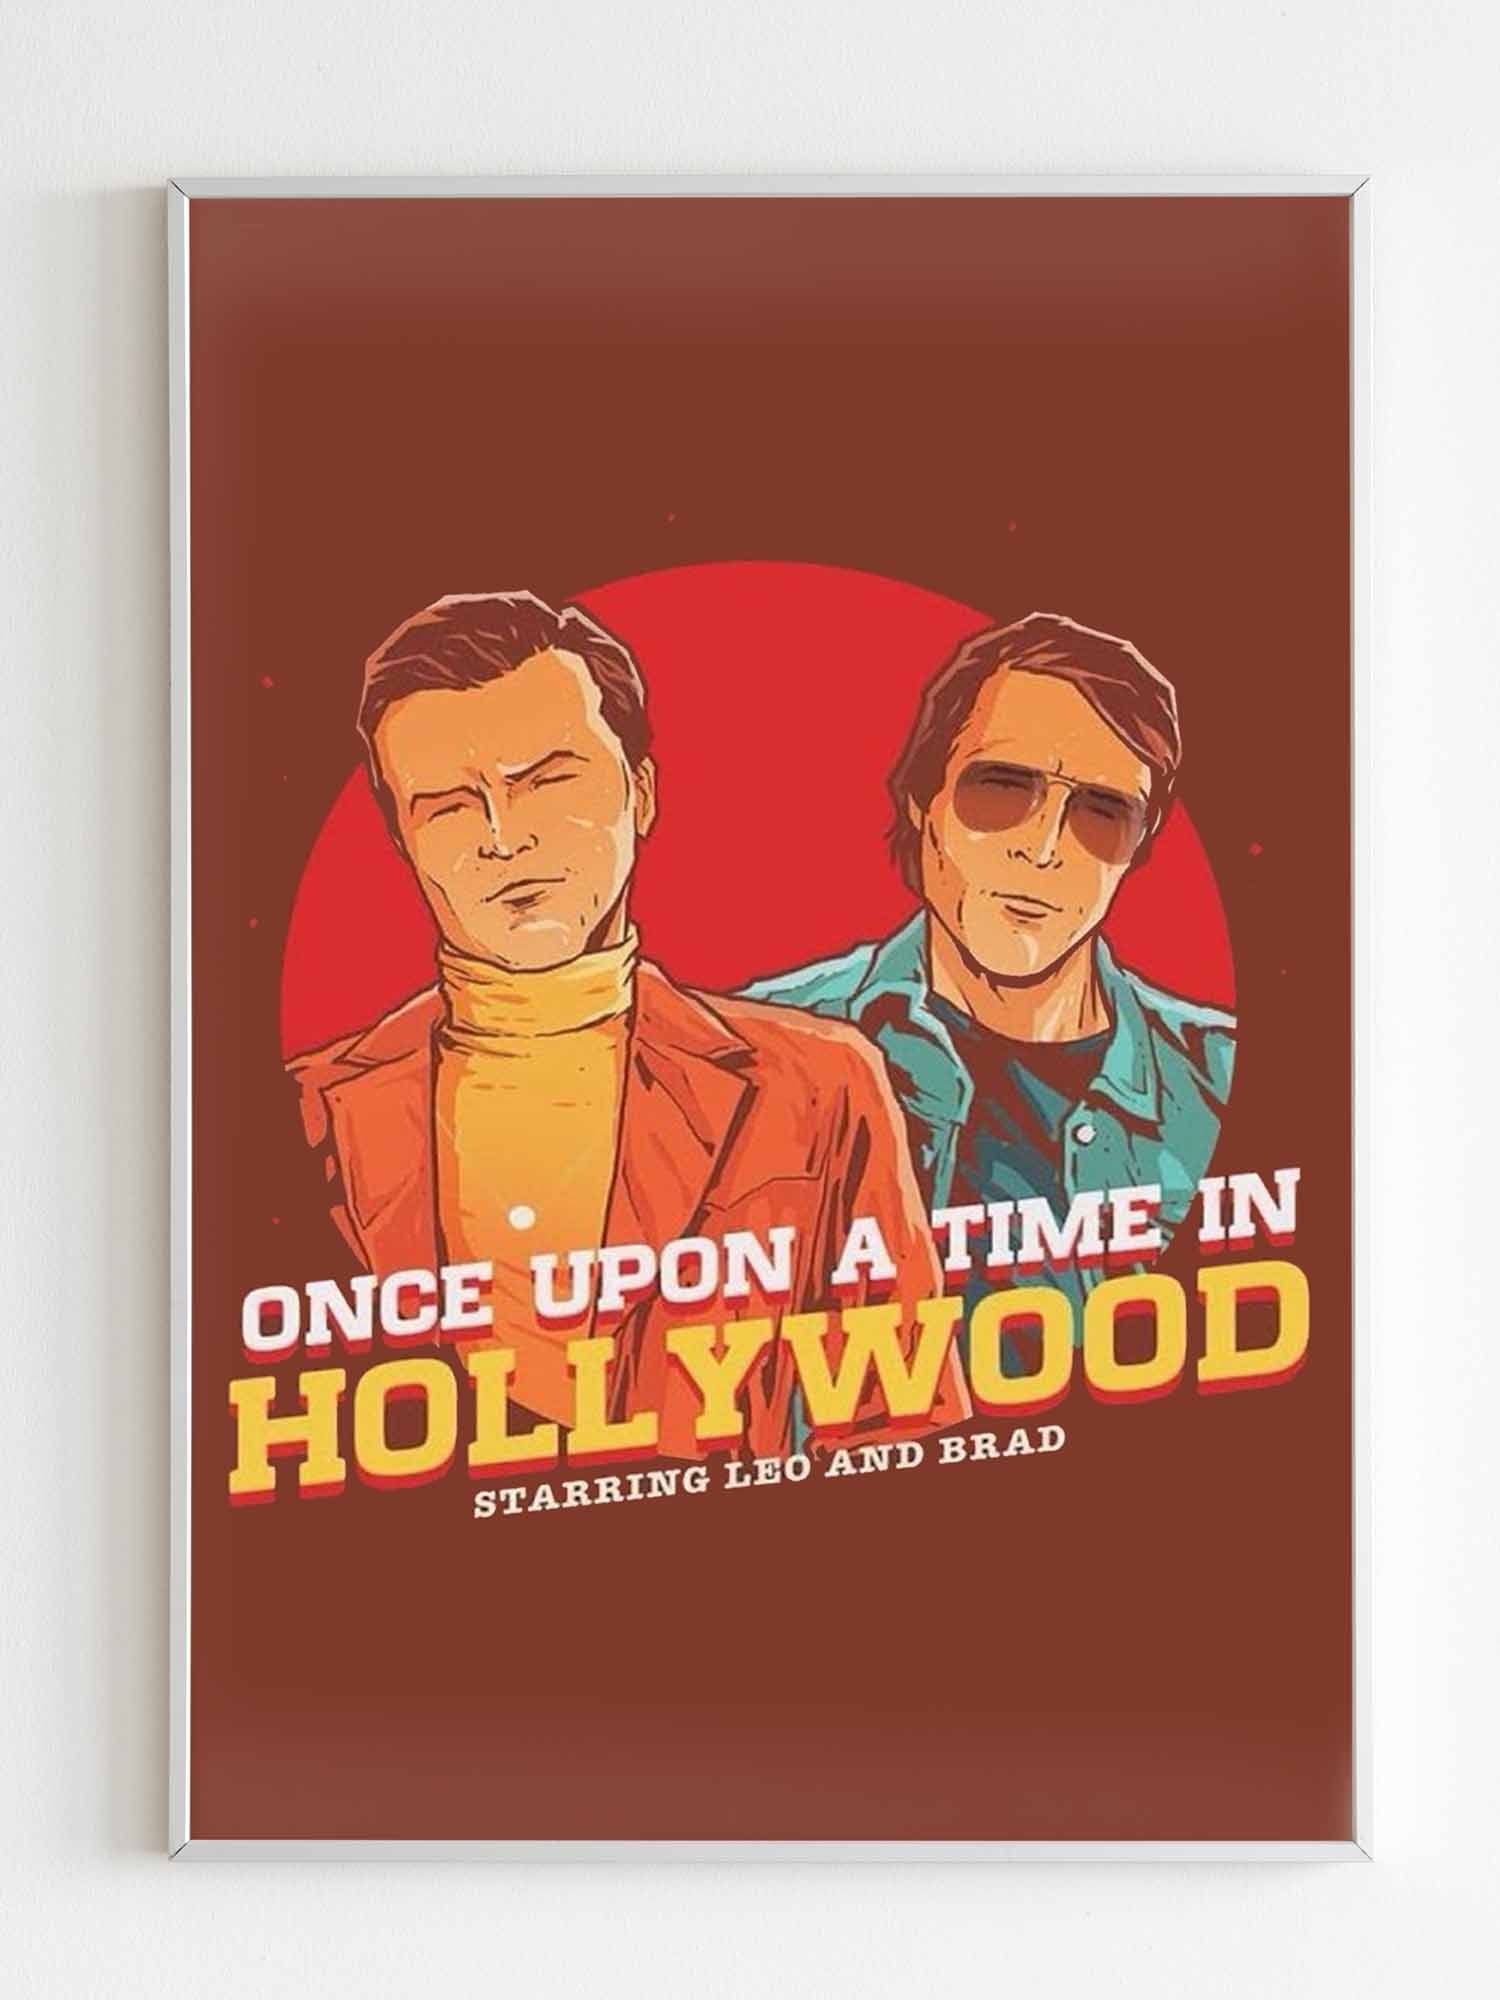 Once Upon A Time In Hollywood Starring Leo And Brad Poster